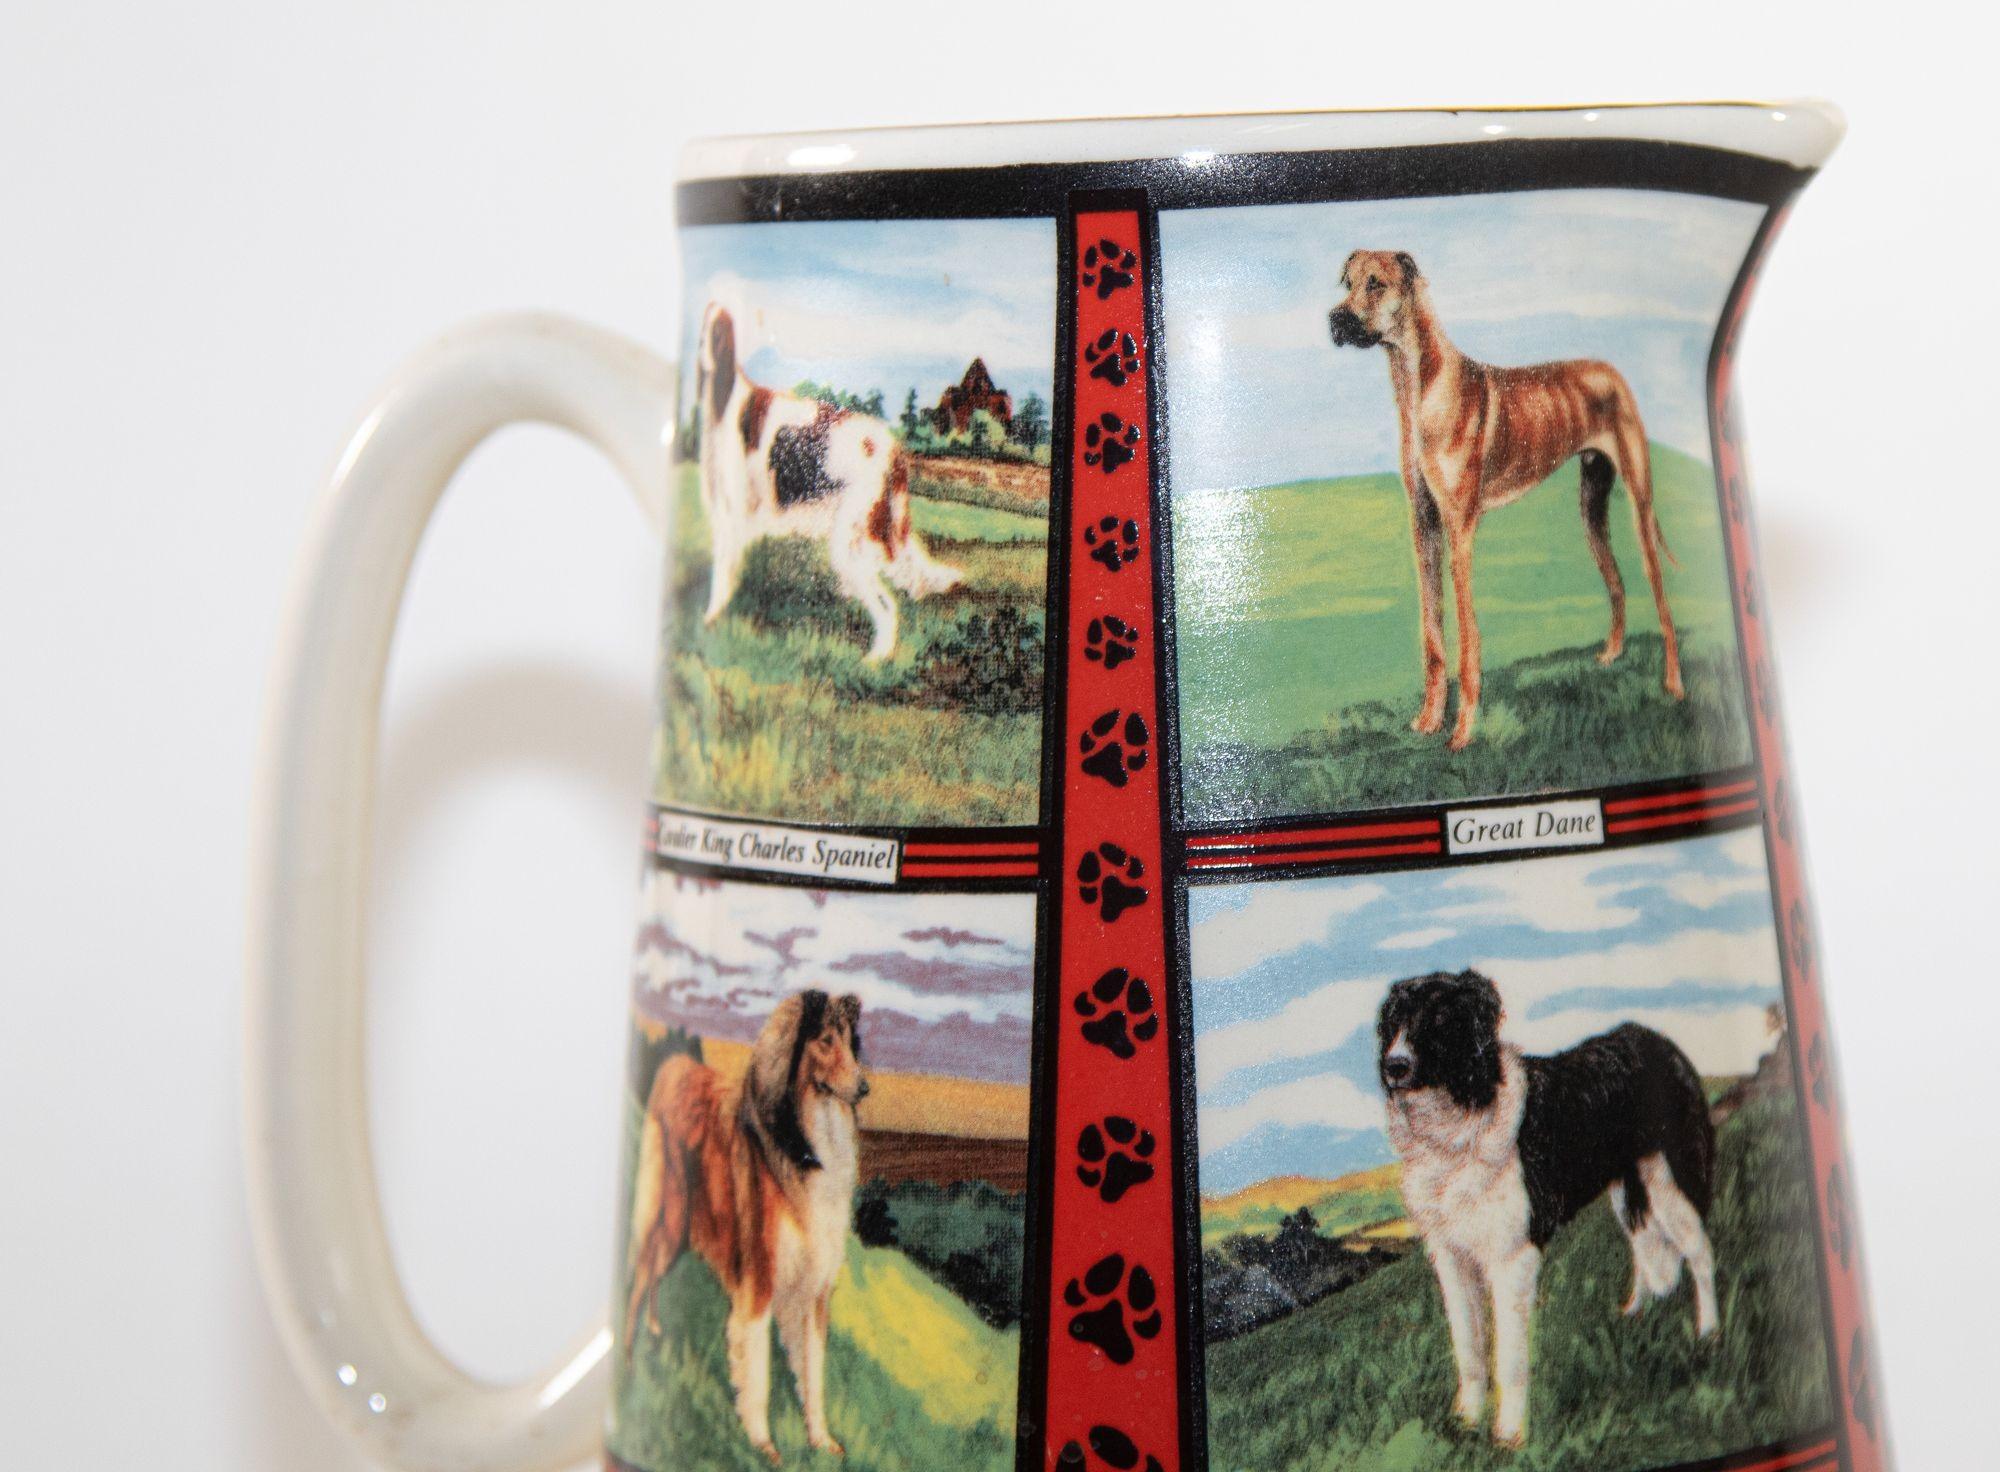 Vintage 1970s Ceramic Pitcher, Derbyshire England with Dog Breeds Pictures In Good Condition For Sale In North Hollywood, CA